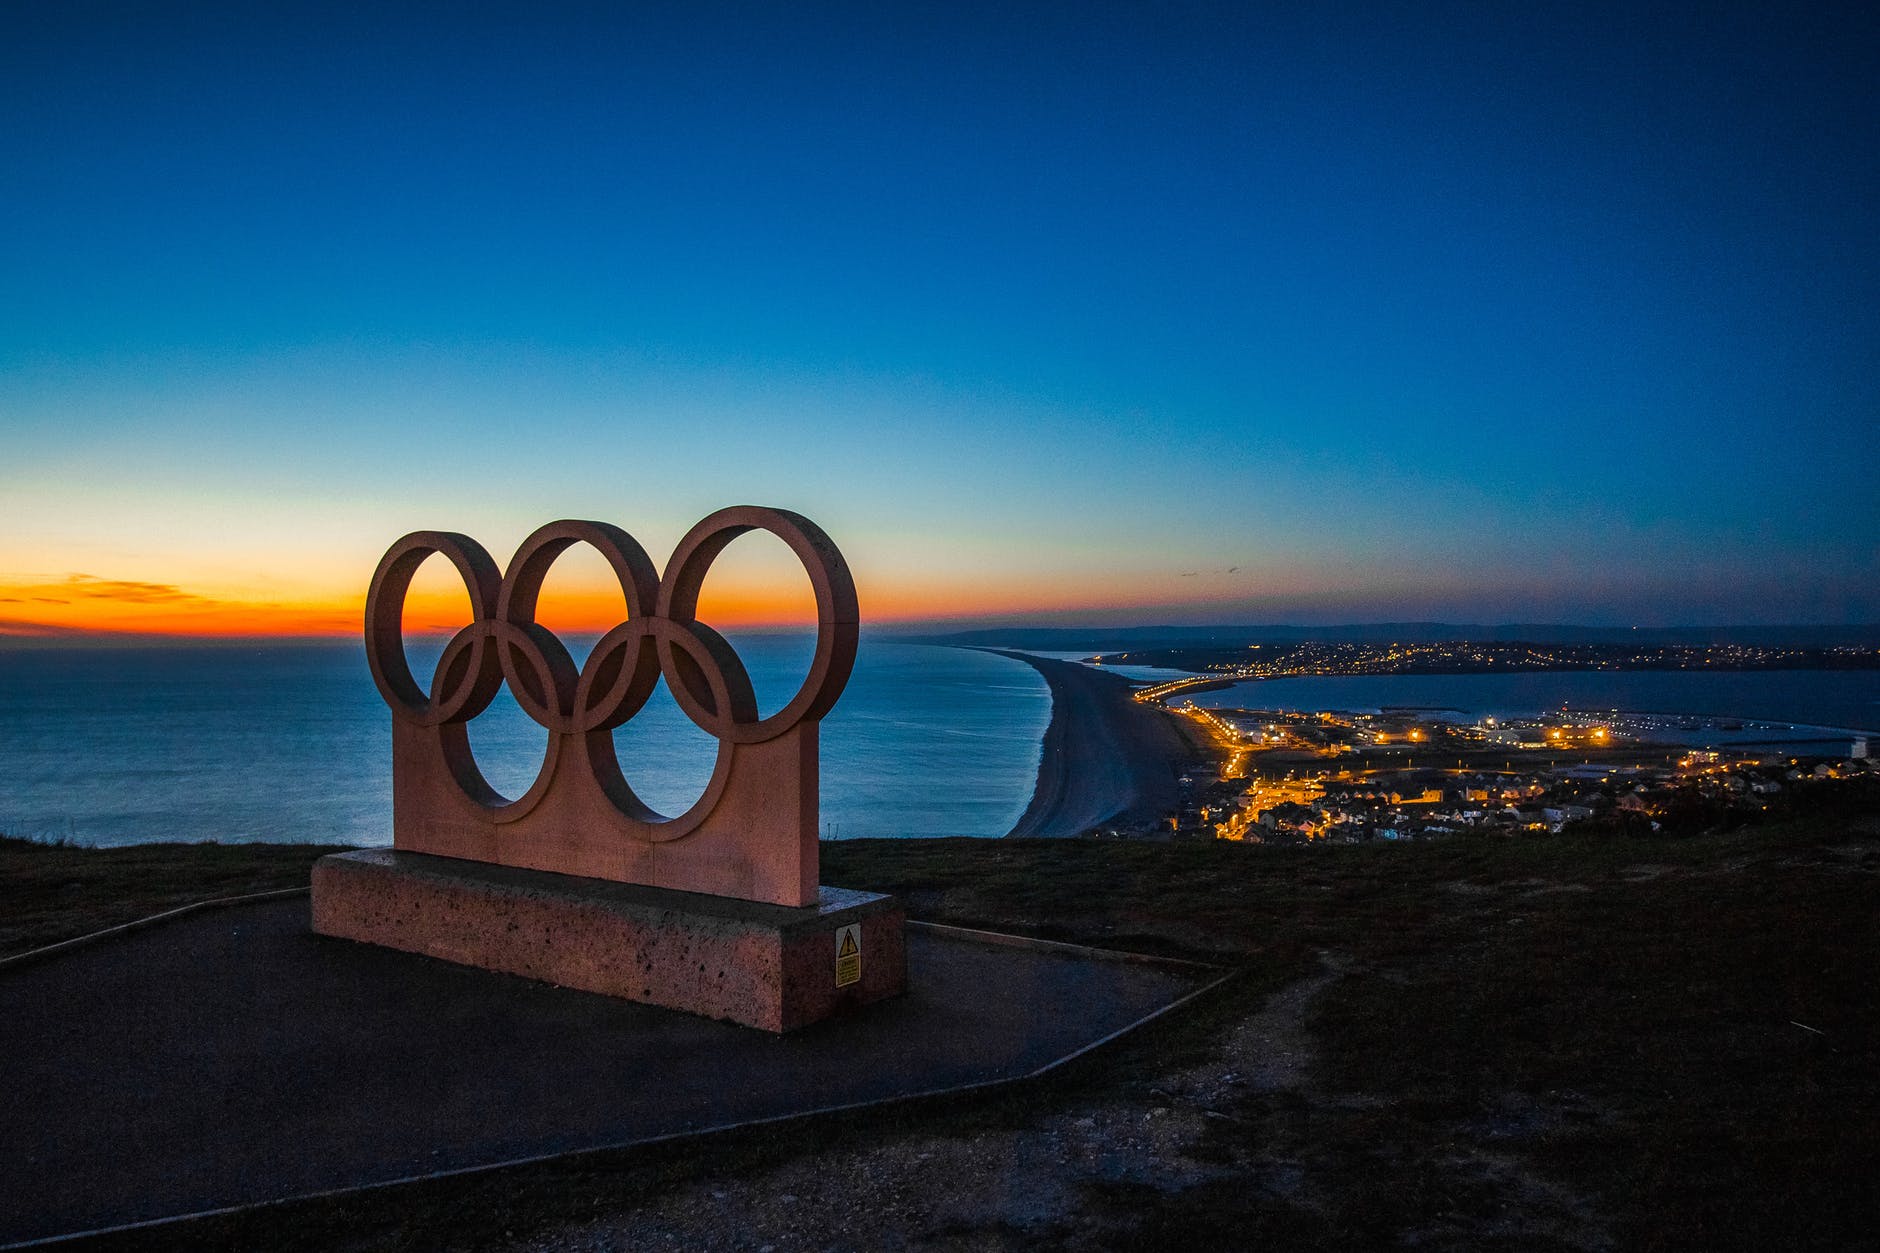 A sculpture on the Olympic rings overlooking a port at night